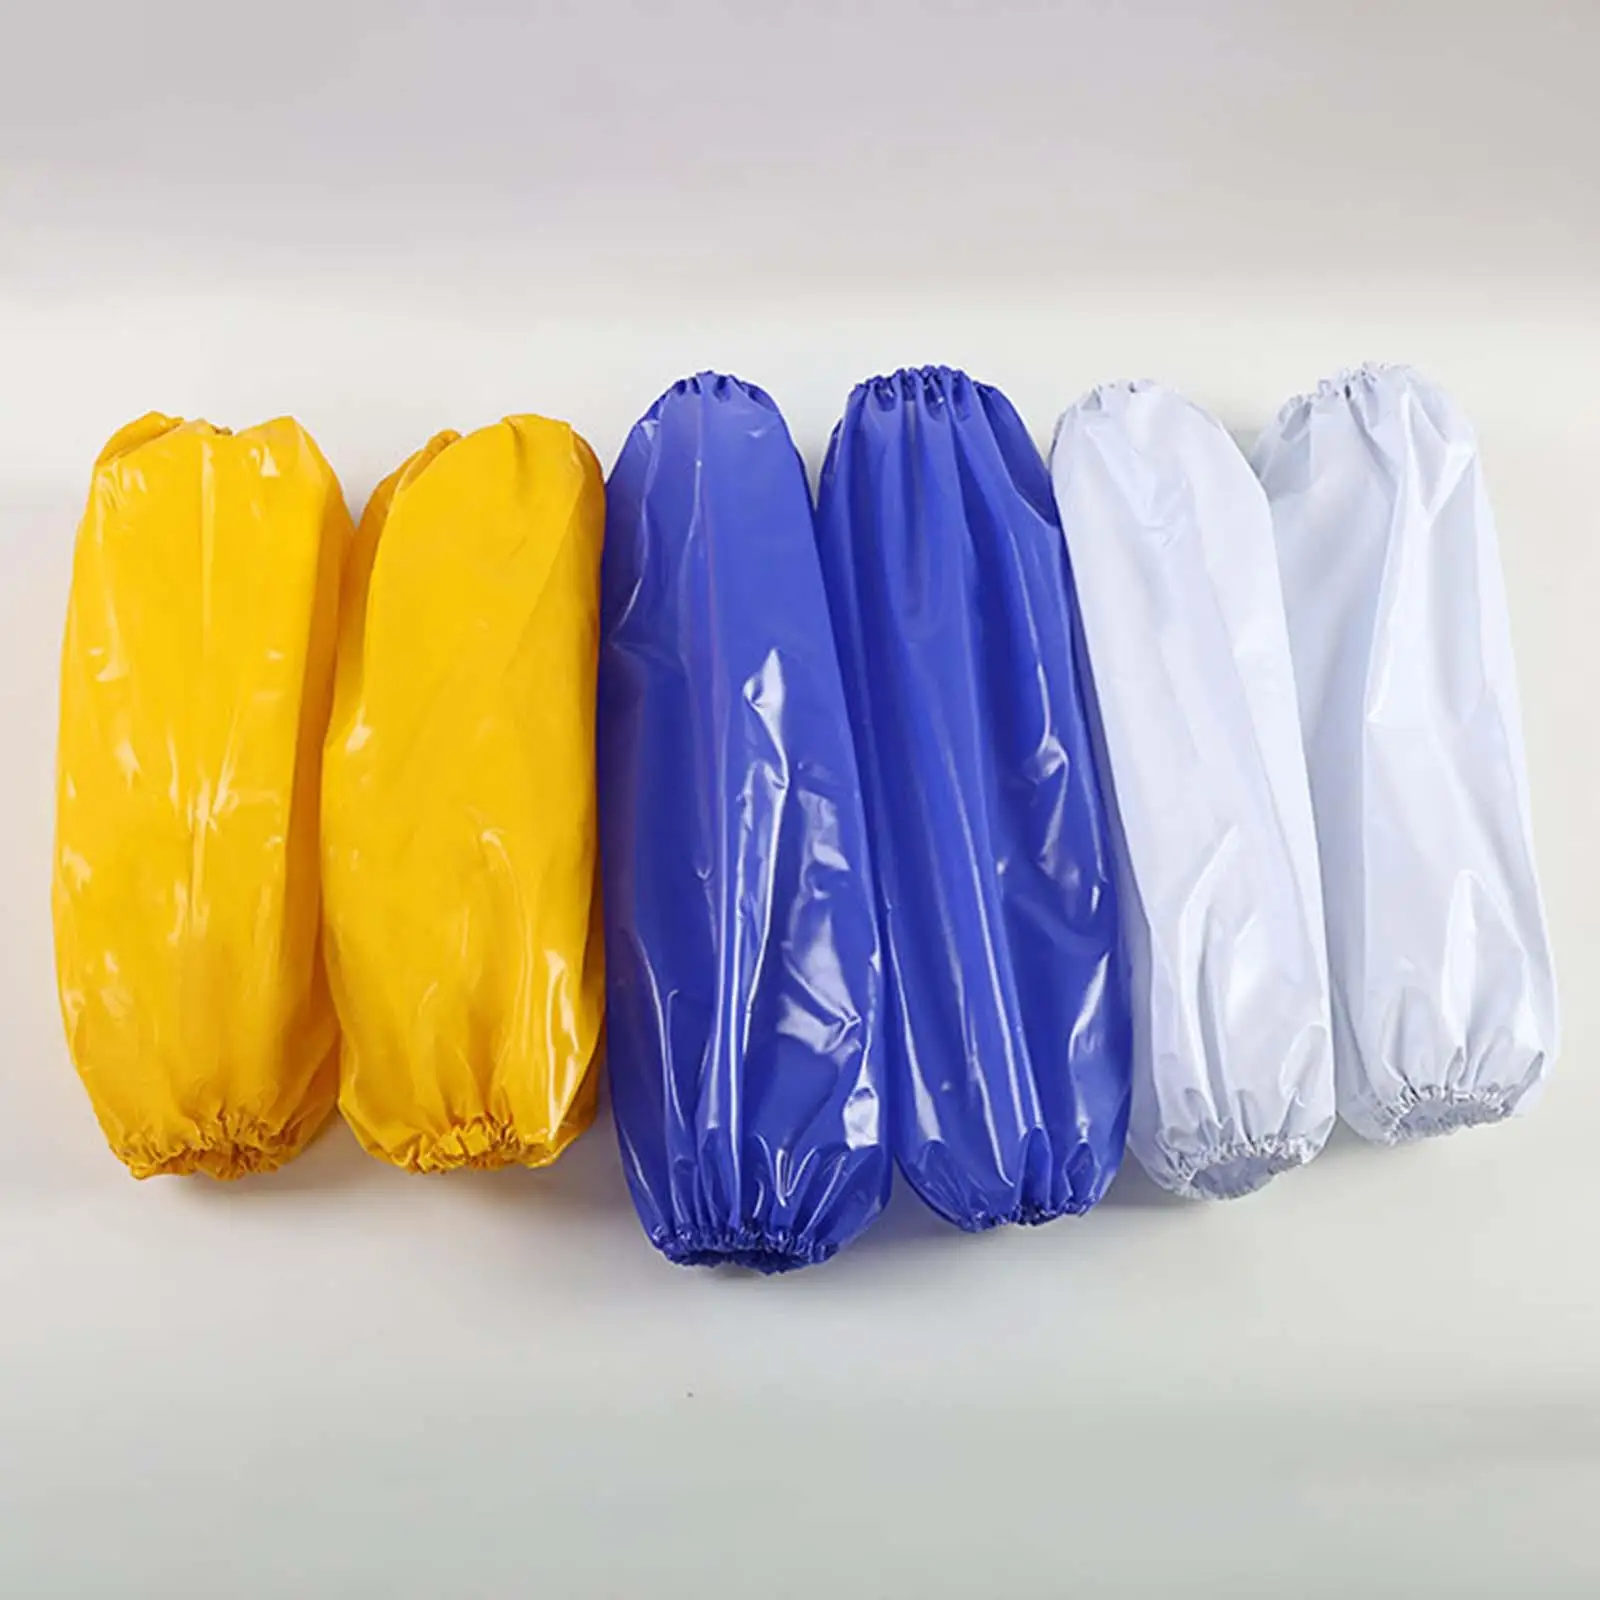 1 Pair Waterproof Sleeves Cleaning Supplies Durable Reusable Stain Proof Oversleeves PVC Arm Sleeves for Painting Pet Shops